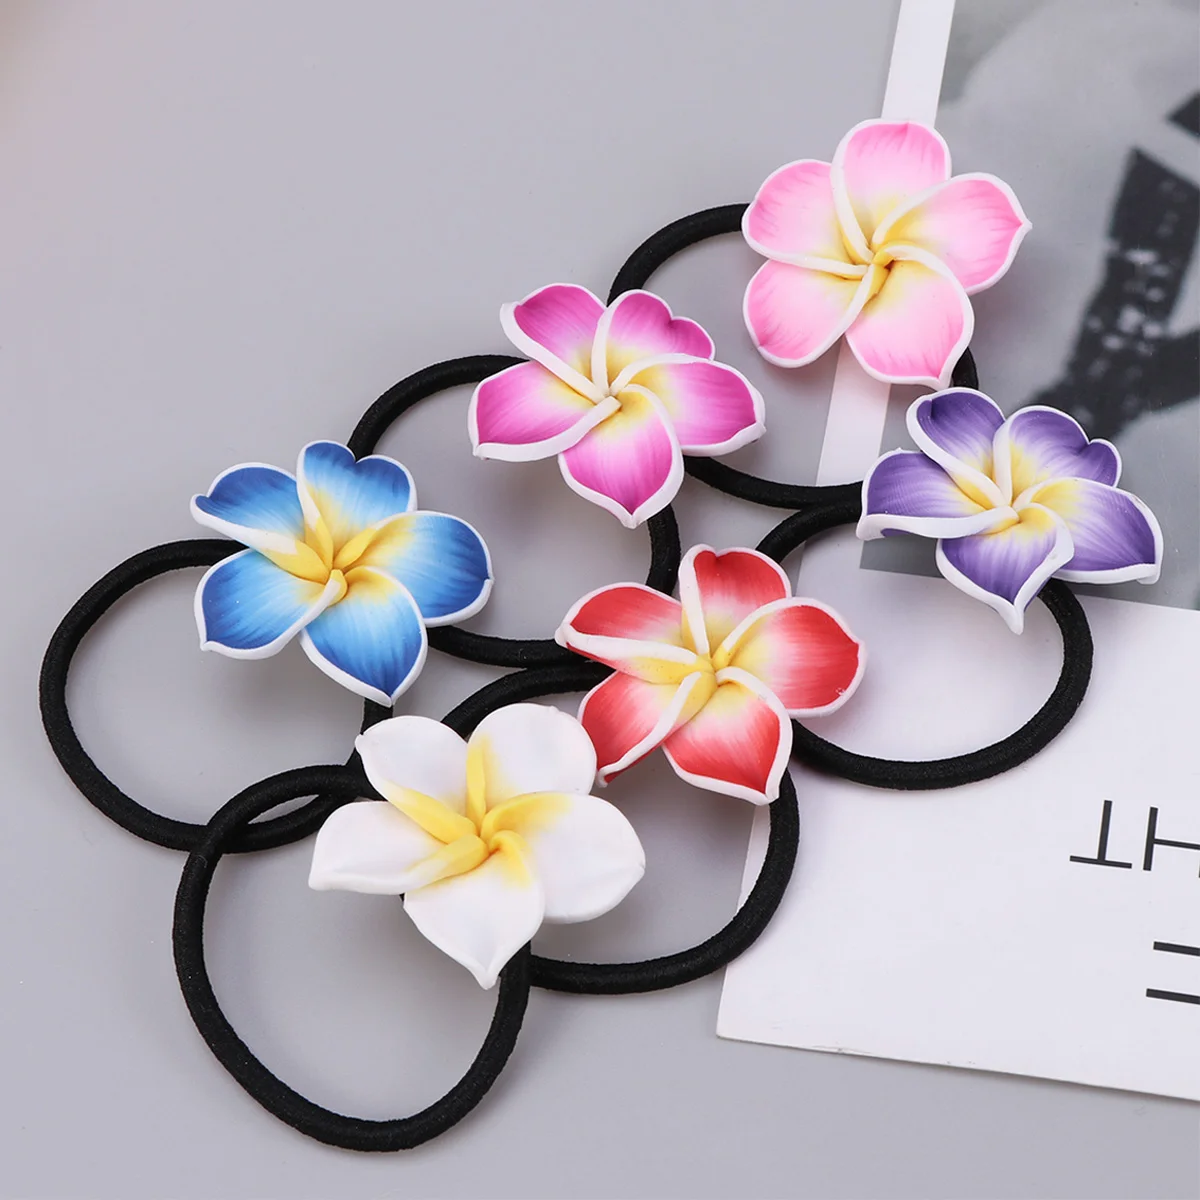 

12pcs Plumeria Hair Ties Hawaiian Beach Flower Hair Ropes Colorful Floral Rubber Bands Elastic Ponytail Holders for